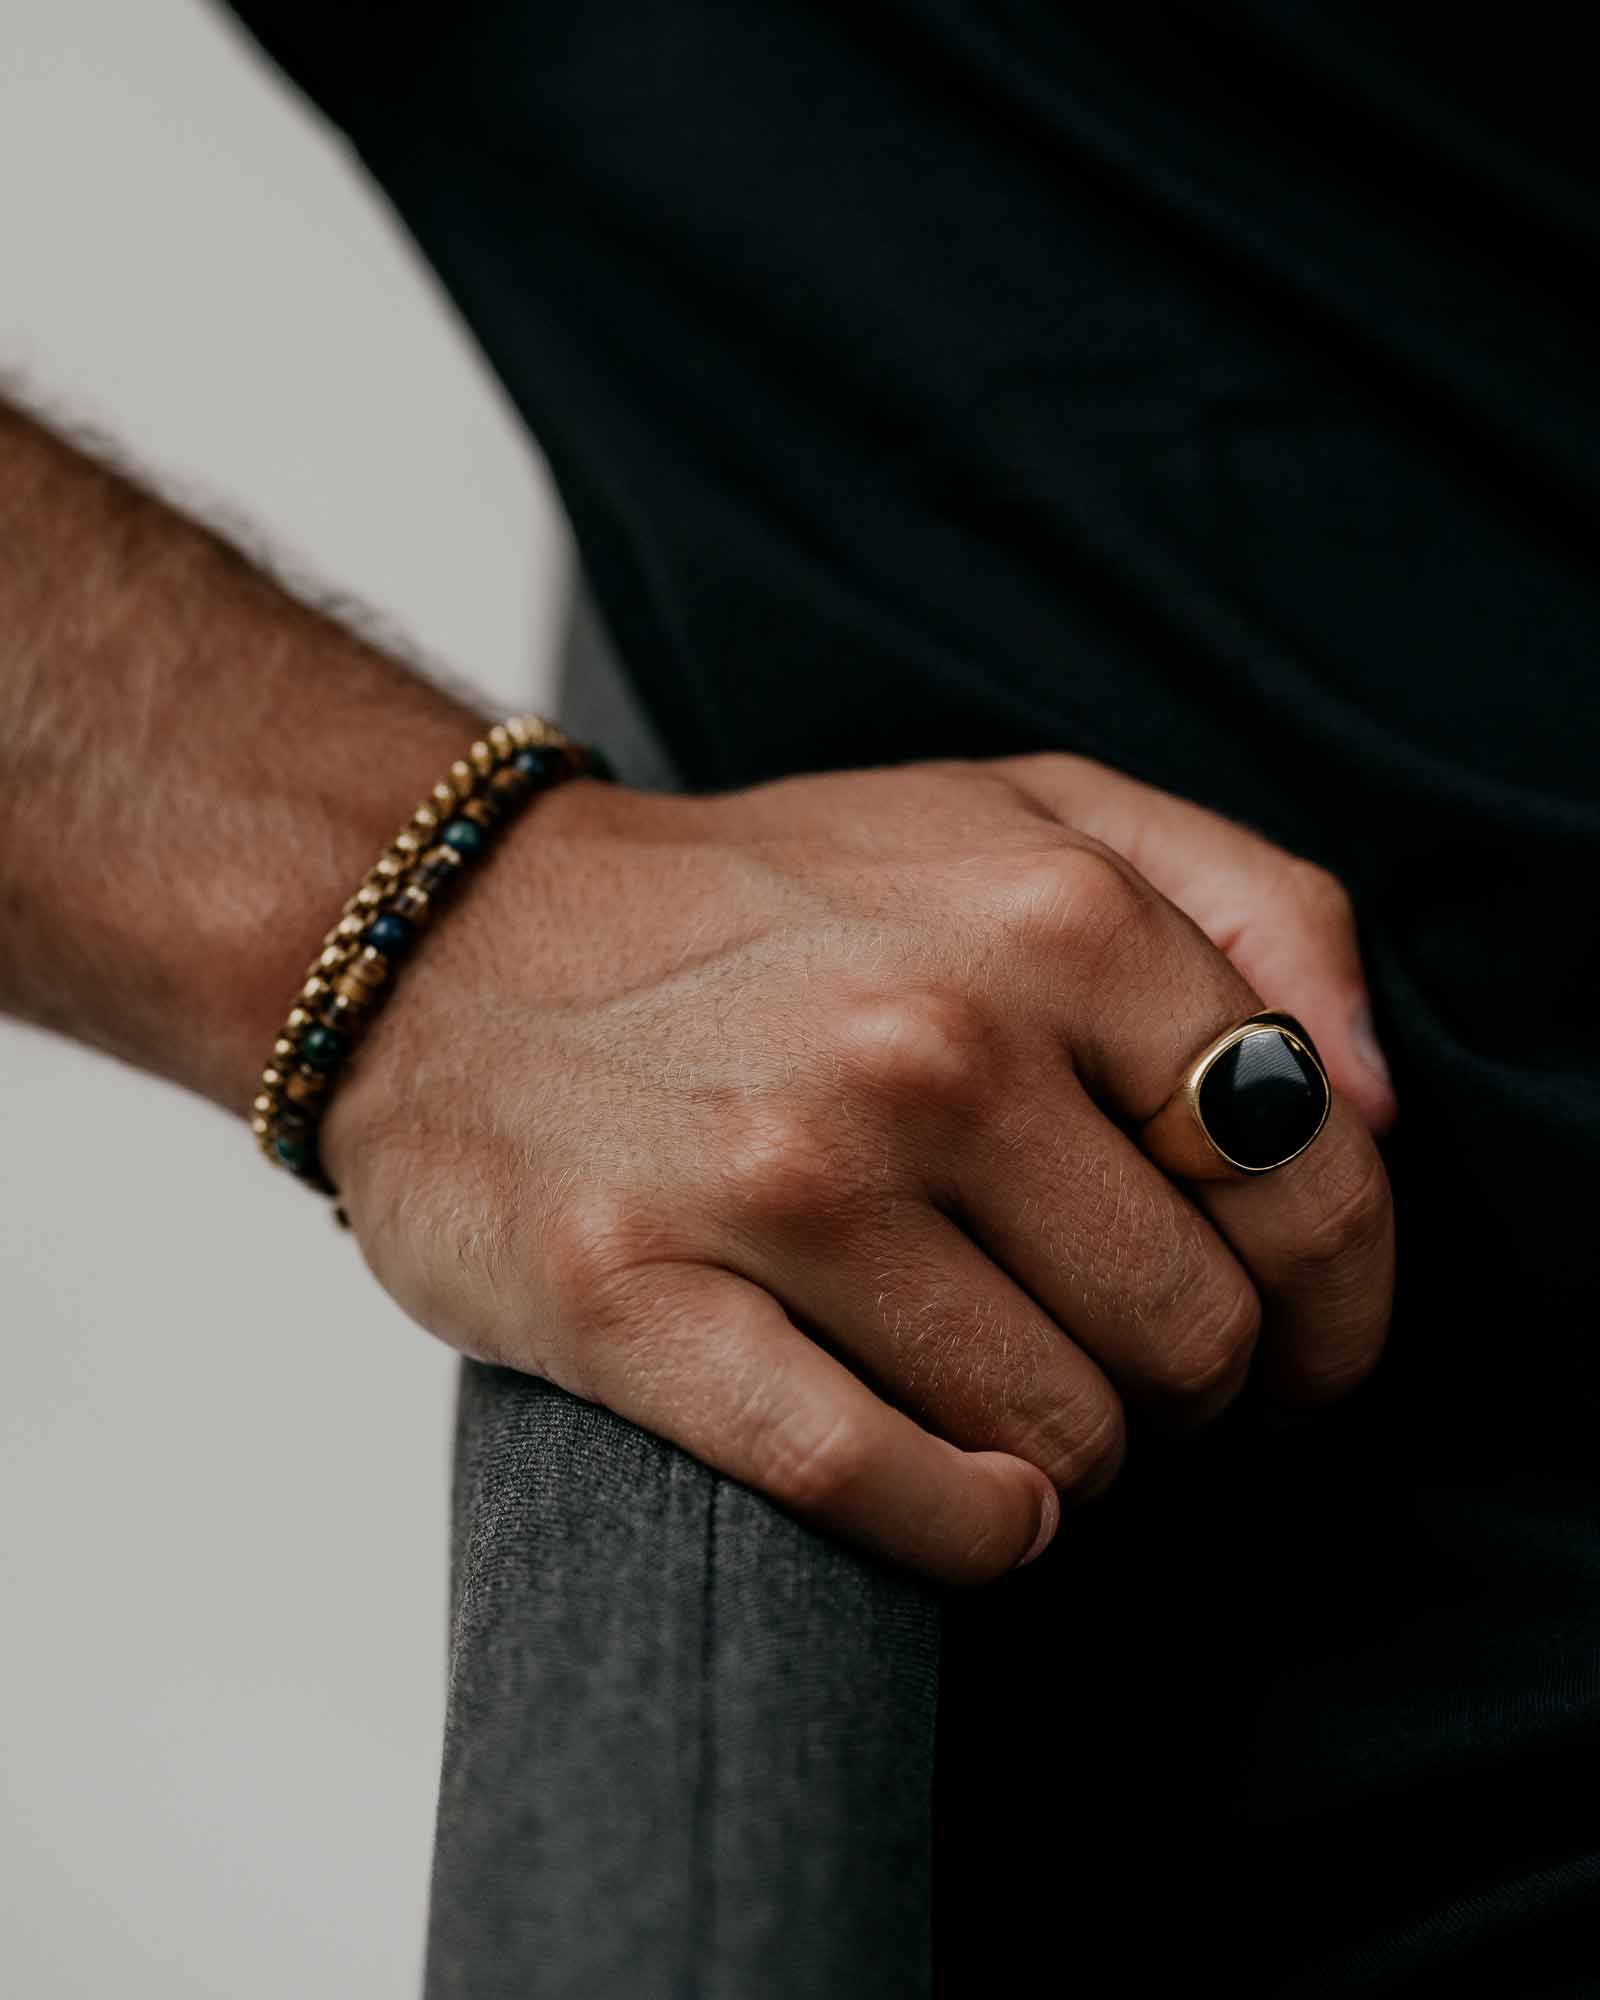 Golden Stainless Steel Ring With Black Stone on the models finger - Stainless Steel Rings - Online Unissex Jewelry - Dicci